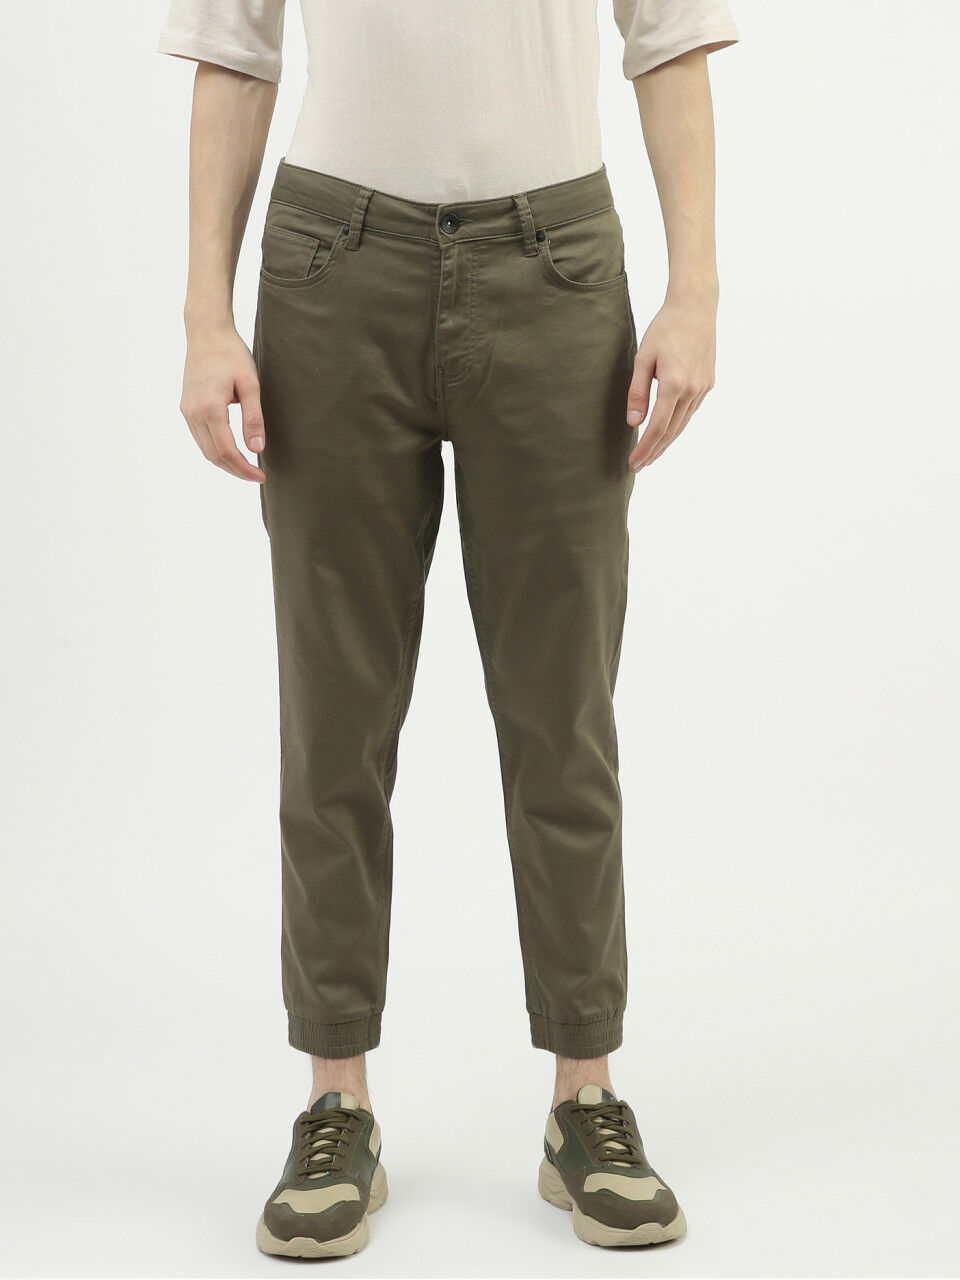 Buy United Colors of Benetton Tan Flat Front Trousers from top Brands at  Best Prices Online in India  Tata CLiQ